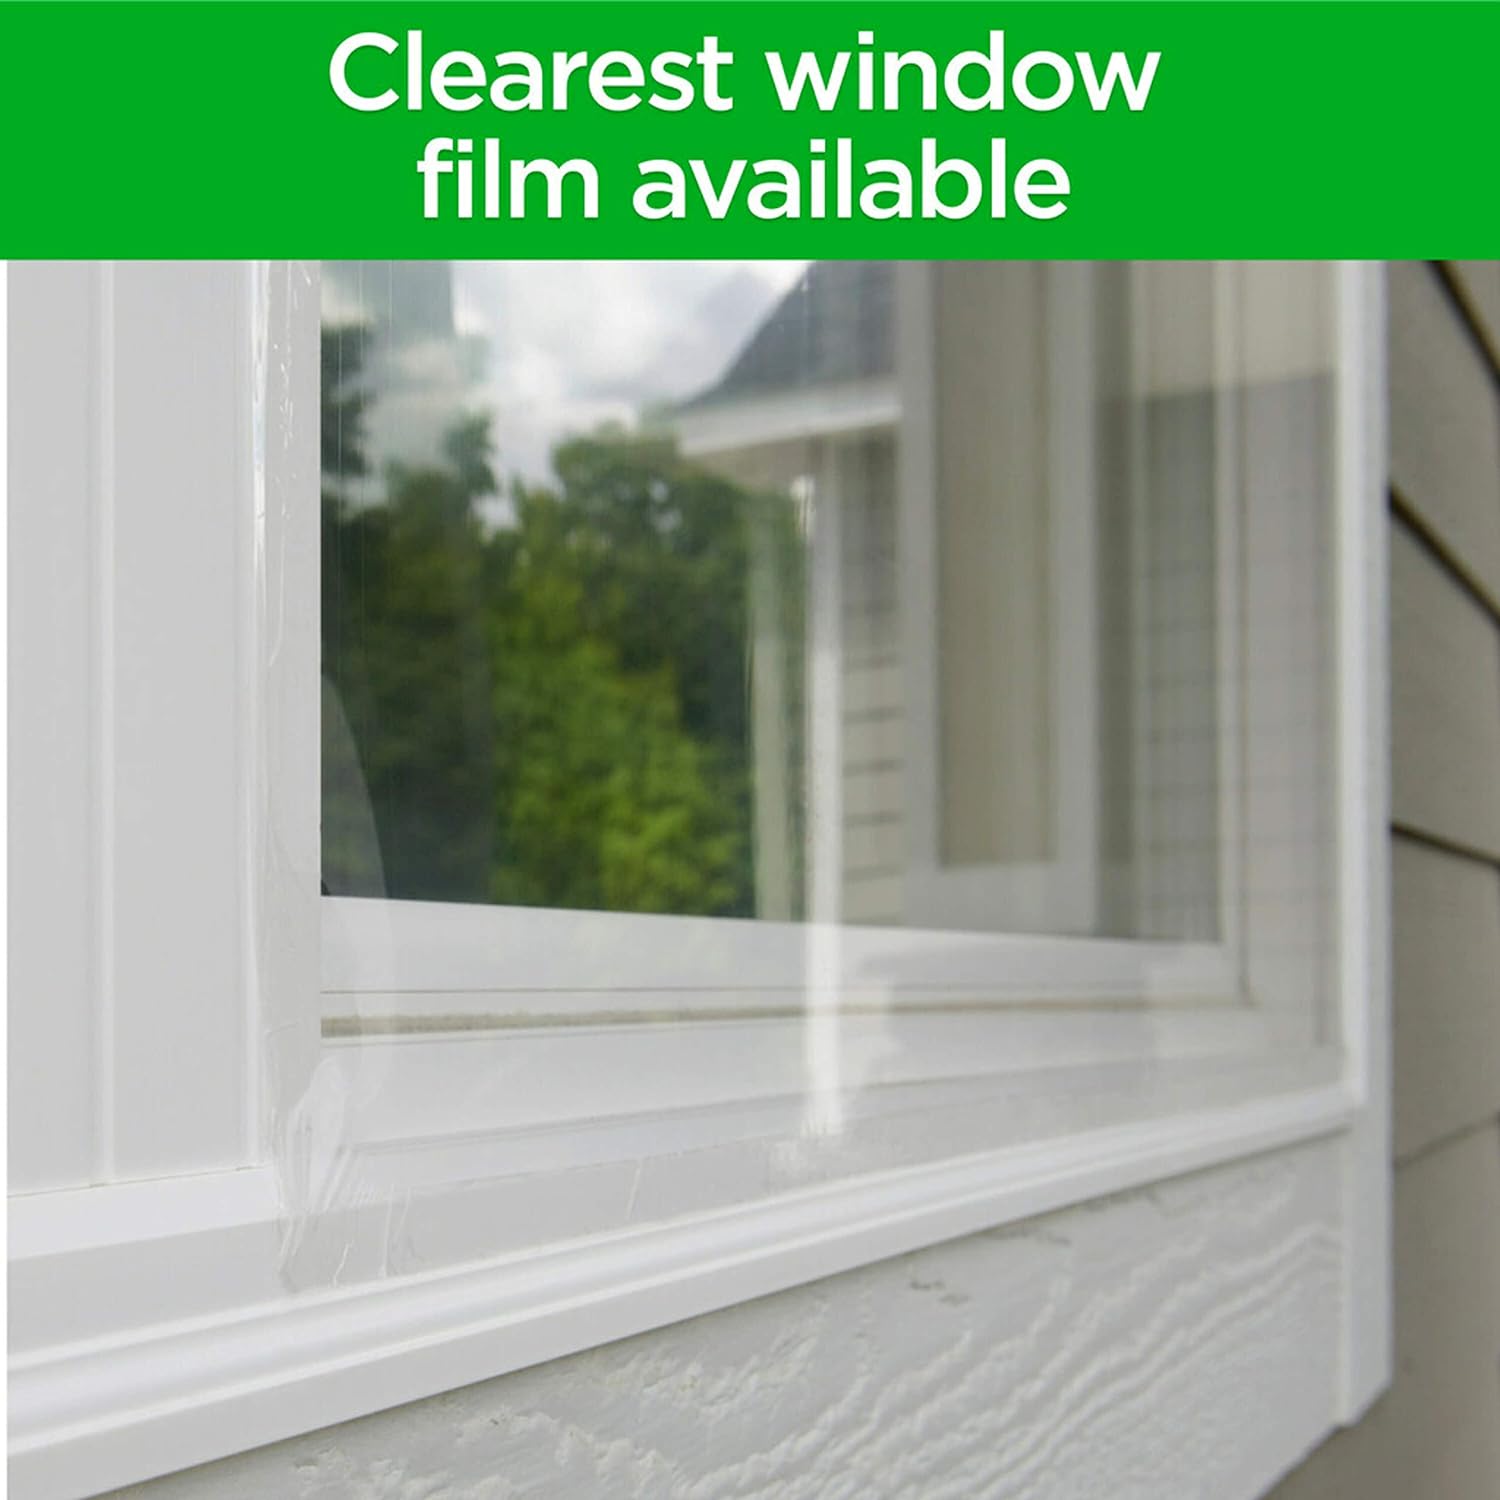 NEW 8 WINDOW INSULATION KIT SHRINK FIT DOUBLE GLAZING FILM DRAUGHT EXCLUDER COLD 